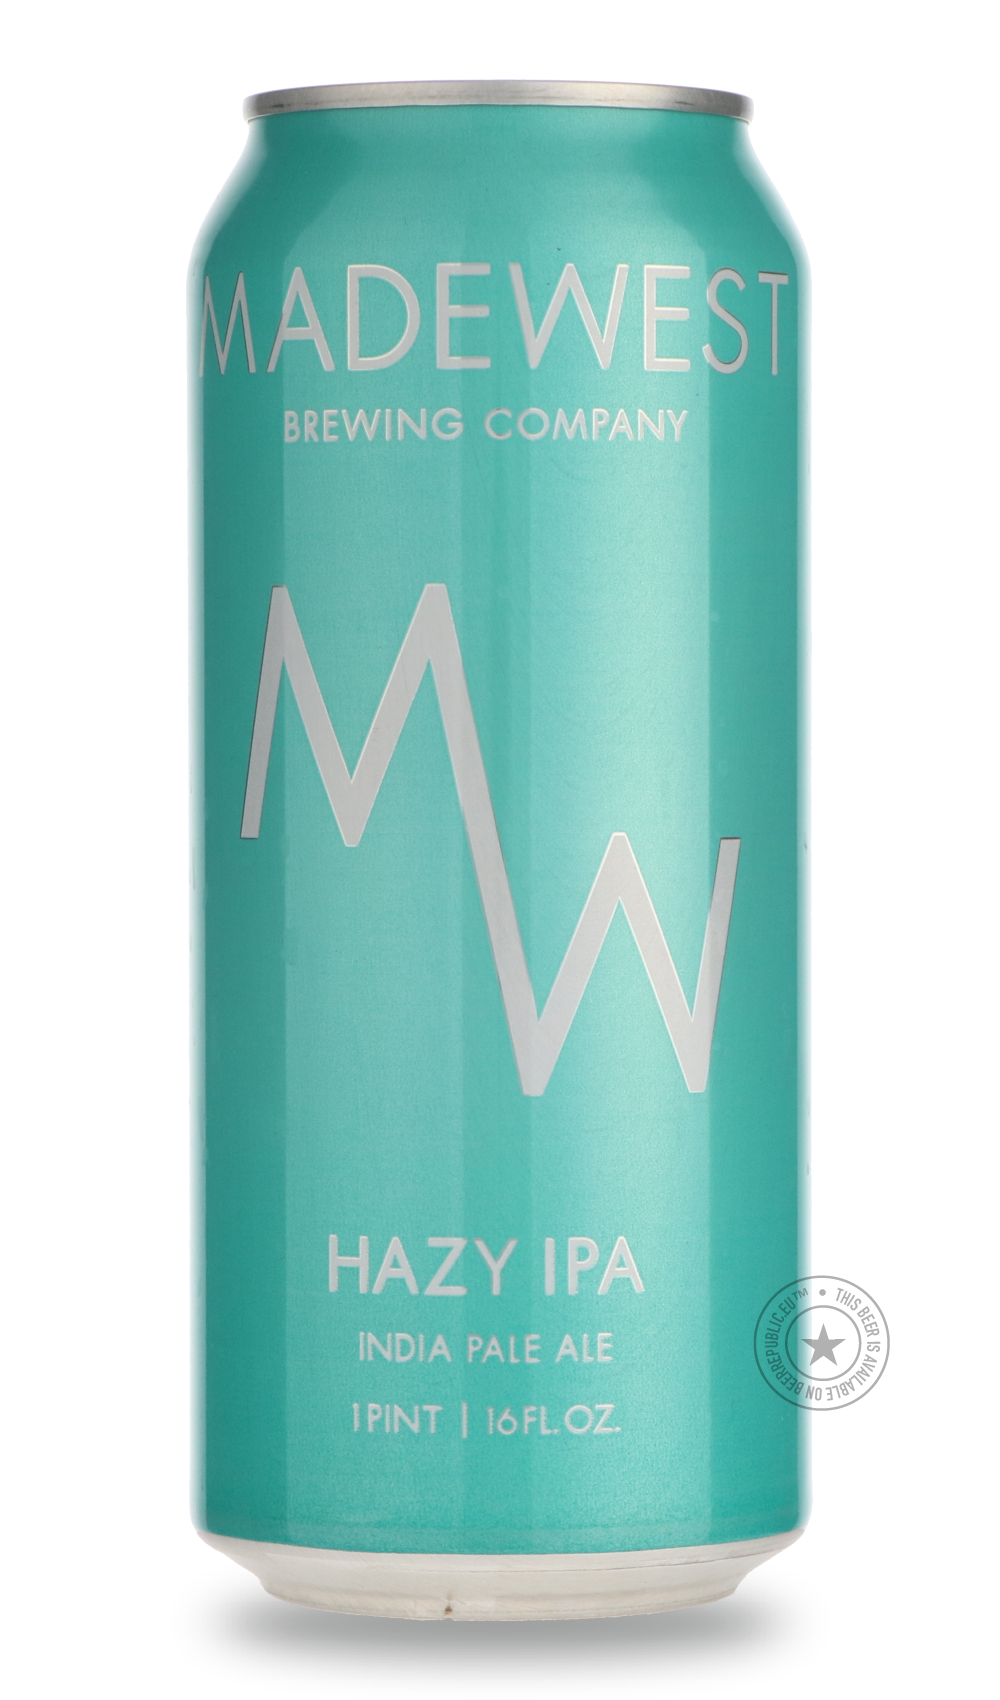 -MadeWest- Hazy IPA-IPA- Only @ Beer Republic - The best online beer store for American & Canadian craft beer - Buy beer online from the USA and Canada - Bier online kopen - Amerikaans bier kopen - Craft beer store - Craft beer kopen - Amerikanisch bier kaufen - Bier online kaufen - Acheter biere online - IPA - Stout - Porter - New England IPA - Hazy IPA - Imperial Stout - Barrel Aged - Barrel Aged Imperial Stout - Brown - Dark beer - Blond - Blonde - Pilsner - Lager - Wheat - Weizen - Amber - Barley Wine -